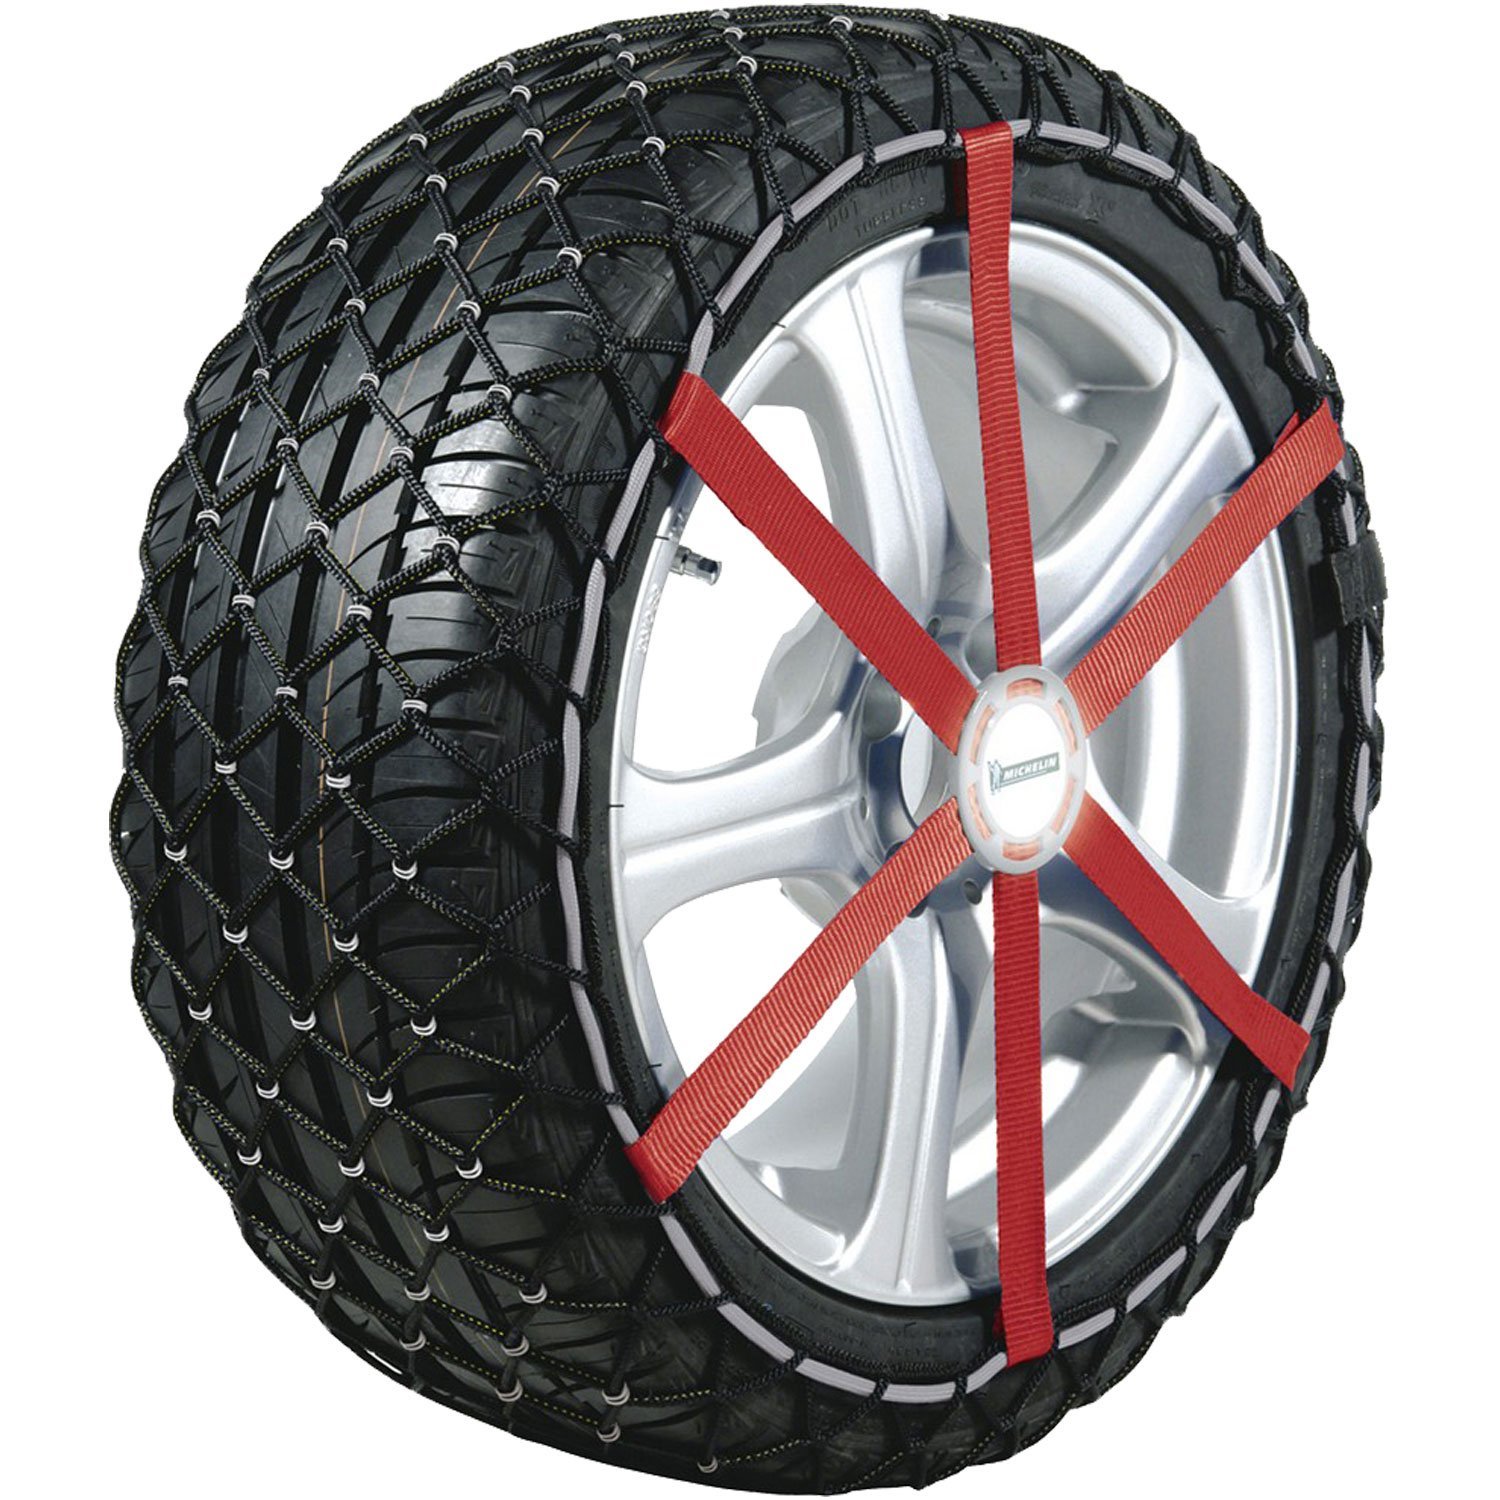 Catene Neve Power Grip 9mm Gruppo 95 gomme 205/60r16 Renault Scenic II 